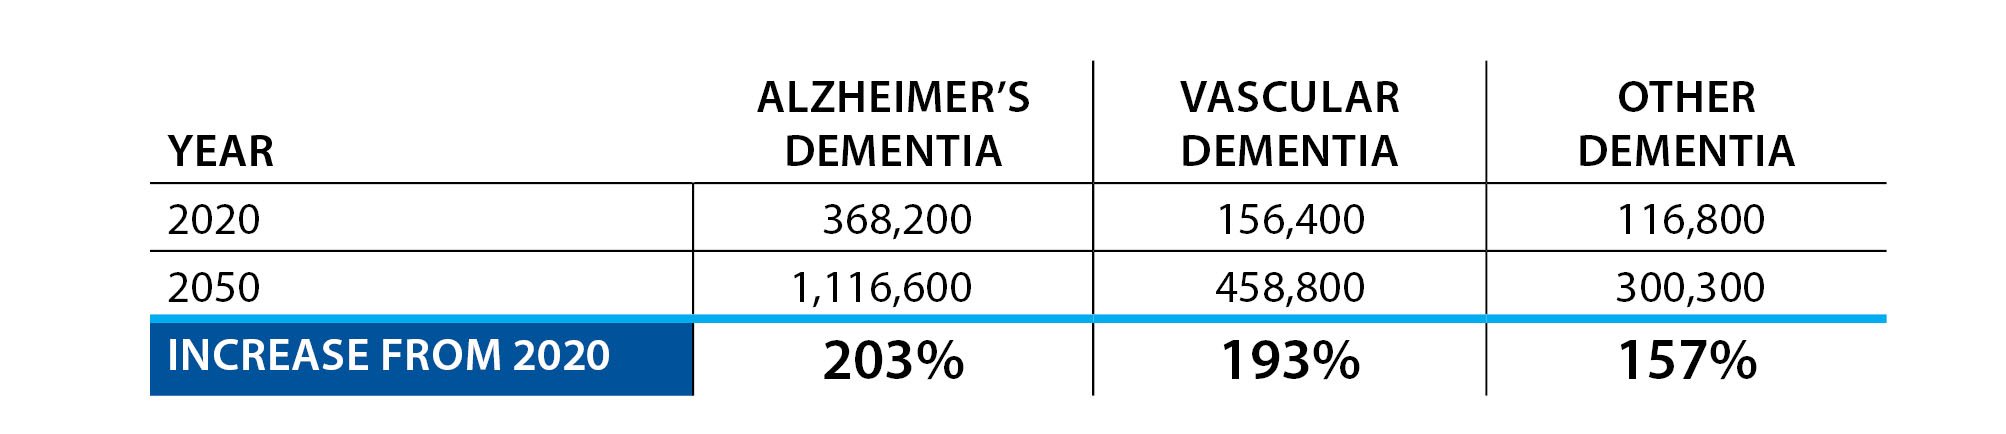 Estimates for the number of people with dementia by type